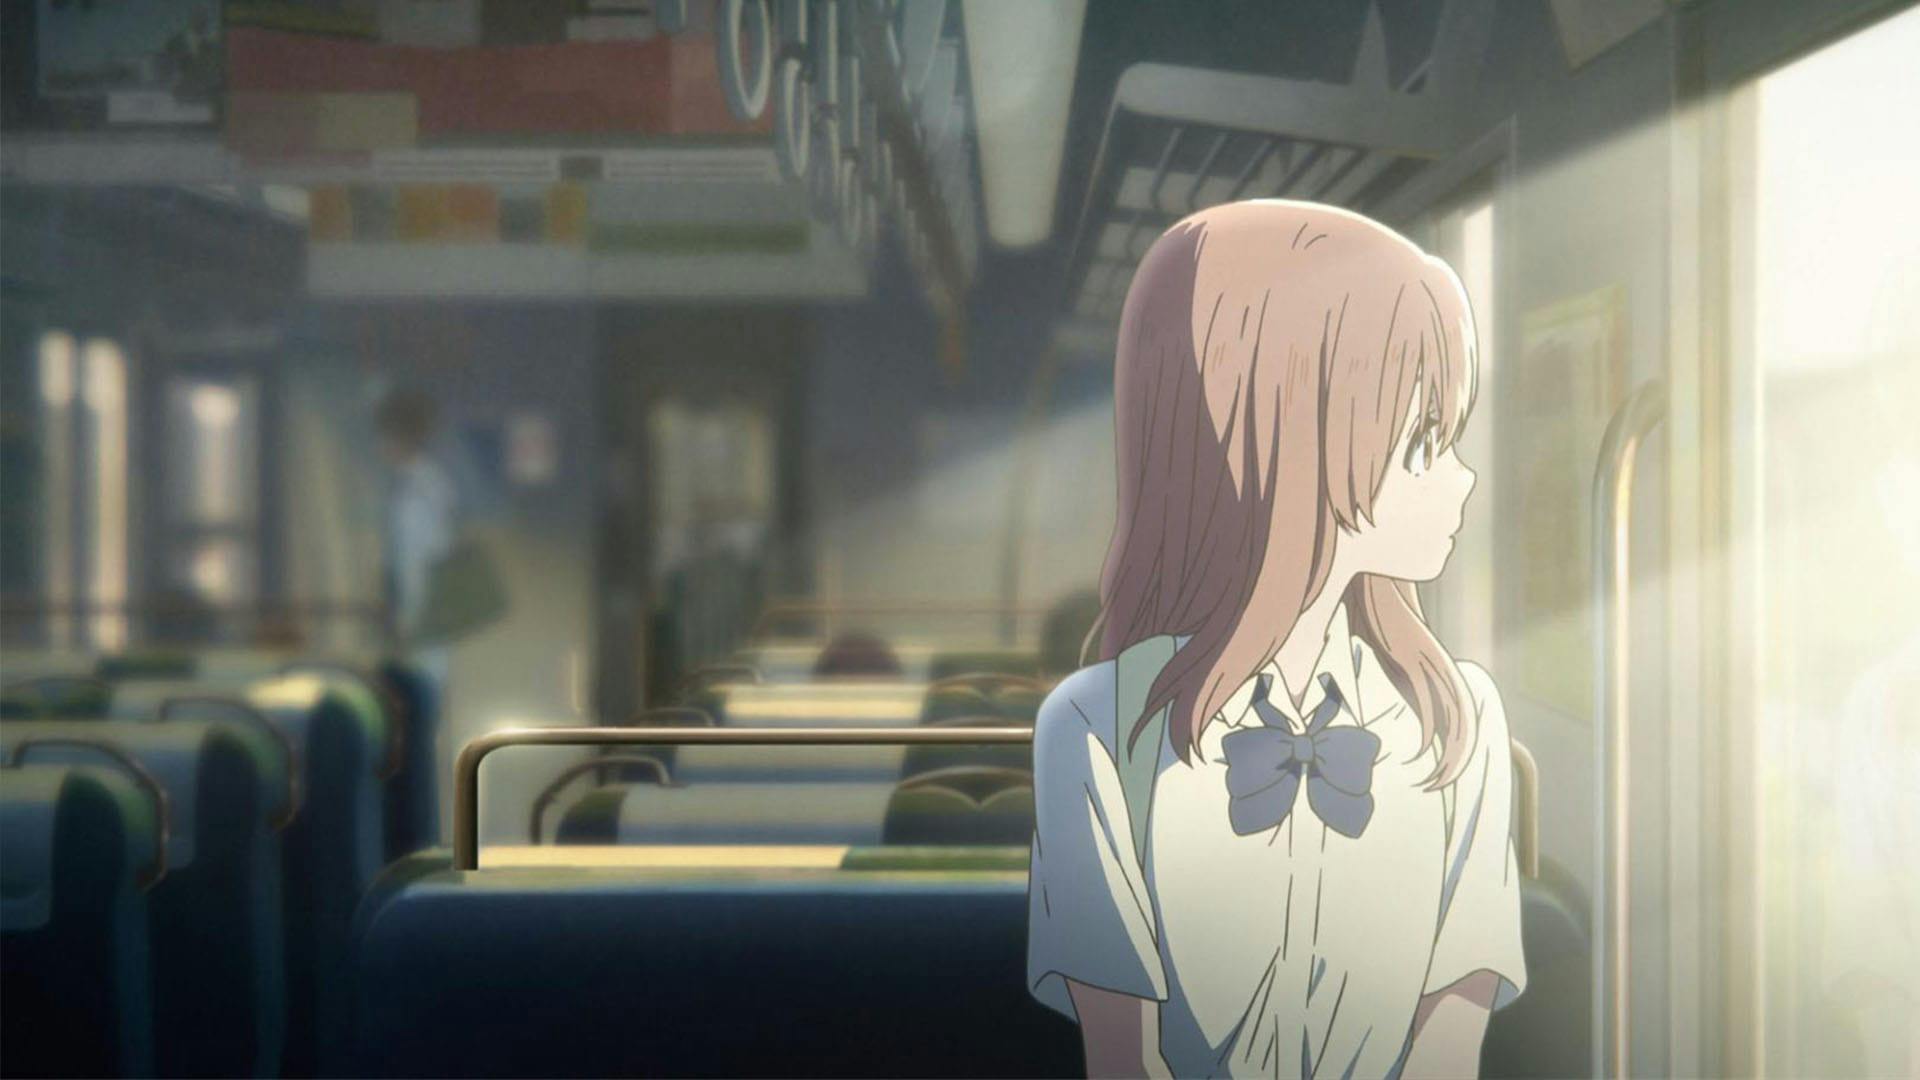 A Silent Voice background image